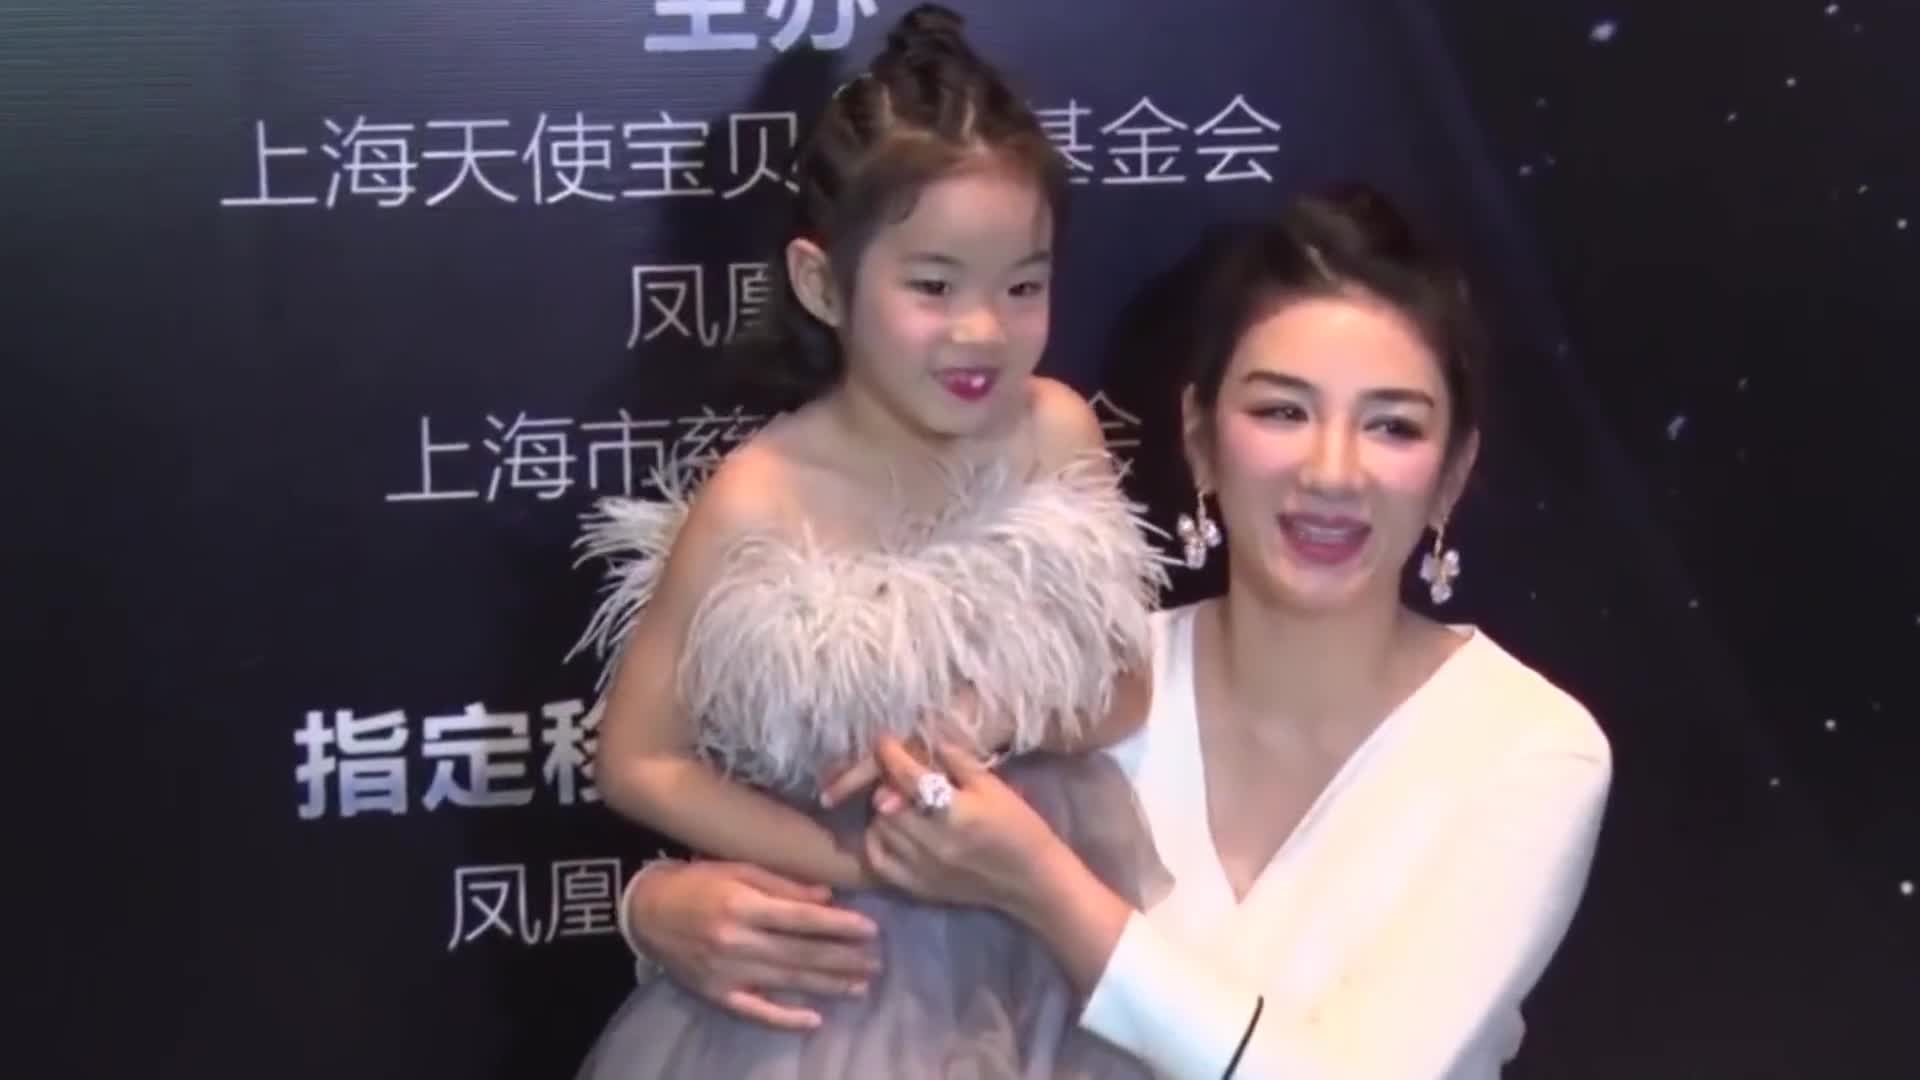 Huang Yi and his 6-year-old daughter interact intimately, warmly and lovingly.